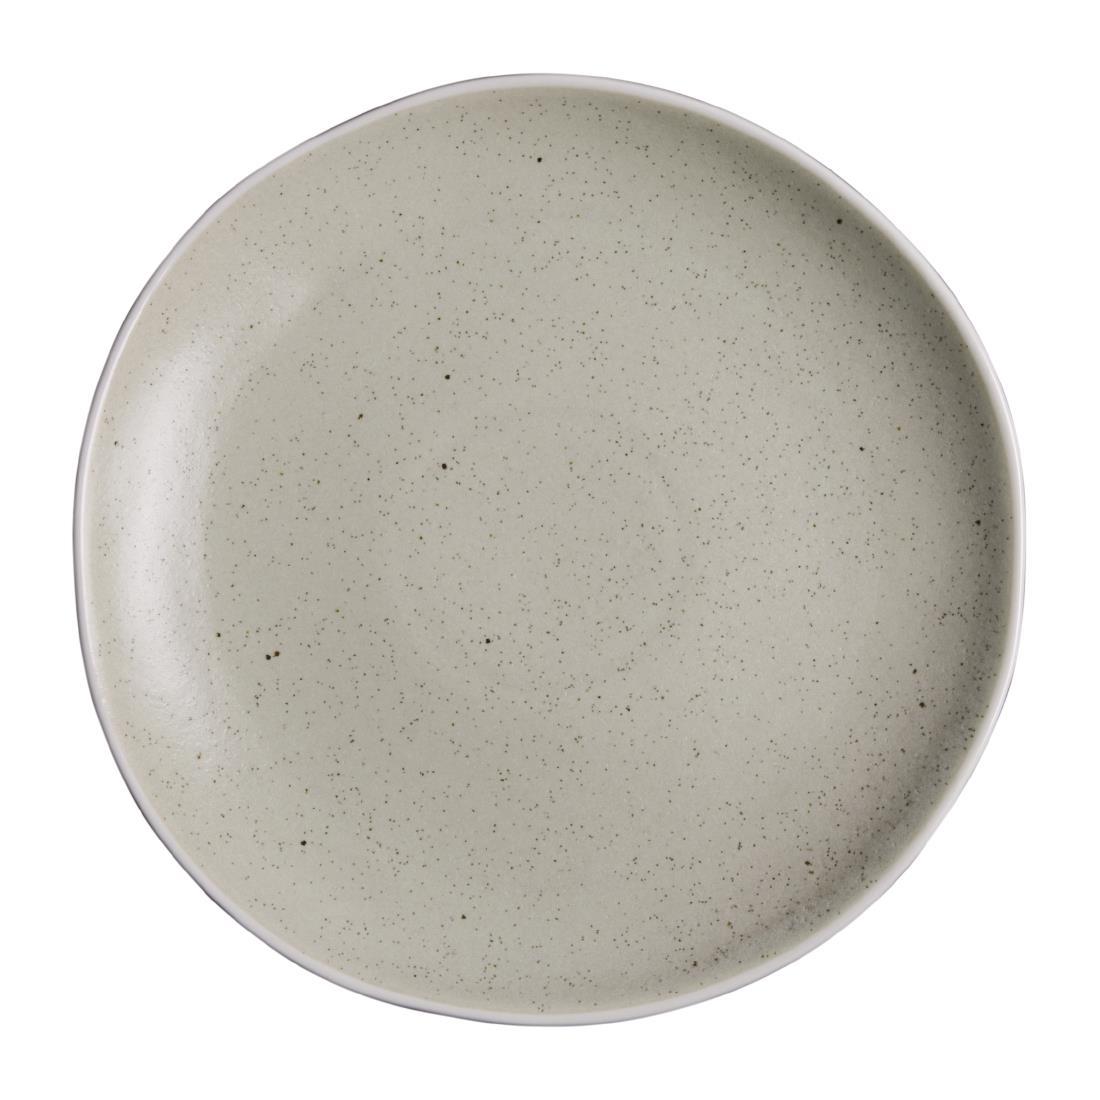 Olympia Chia Plates Sand 270mm (Pack of 6) - DR807  - 3